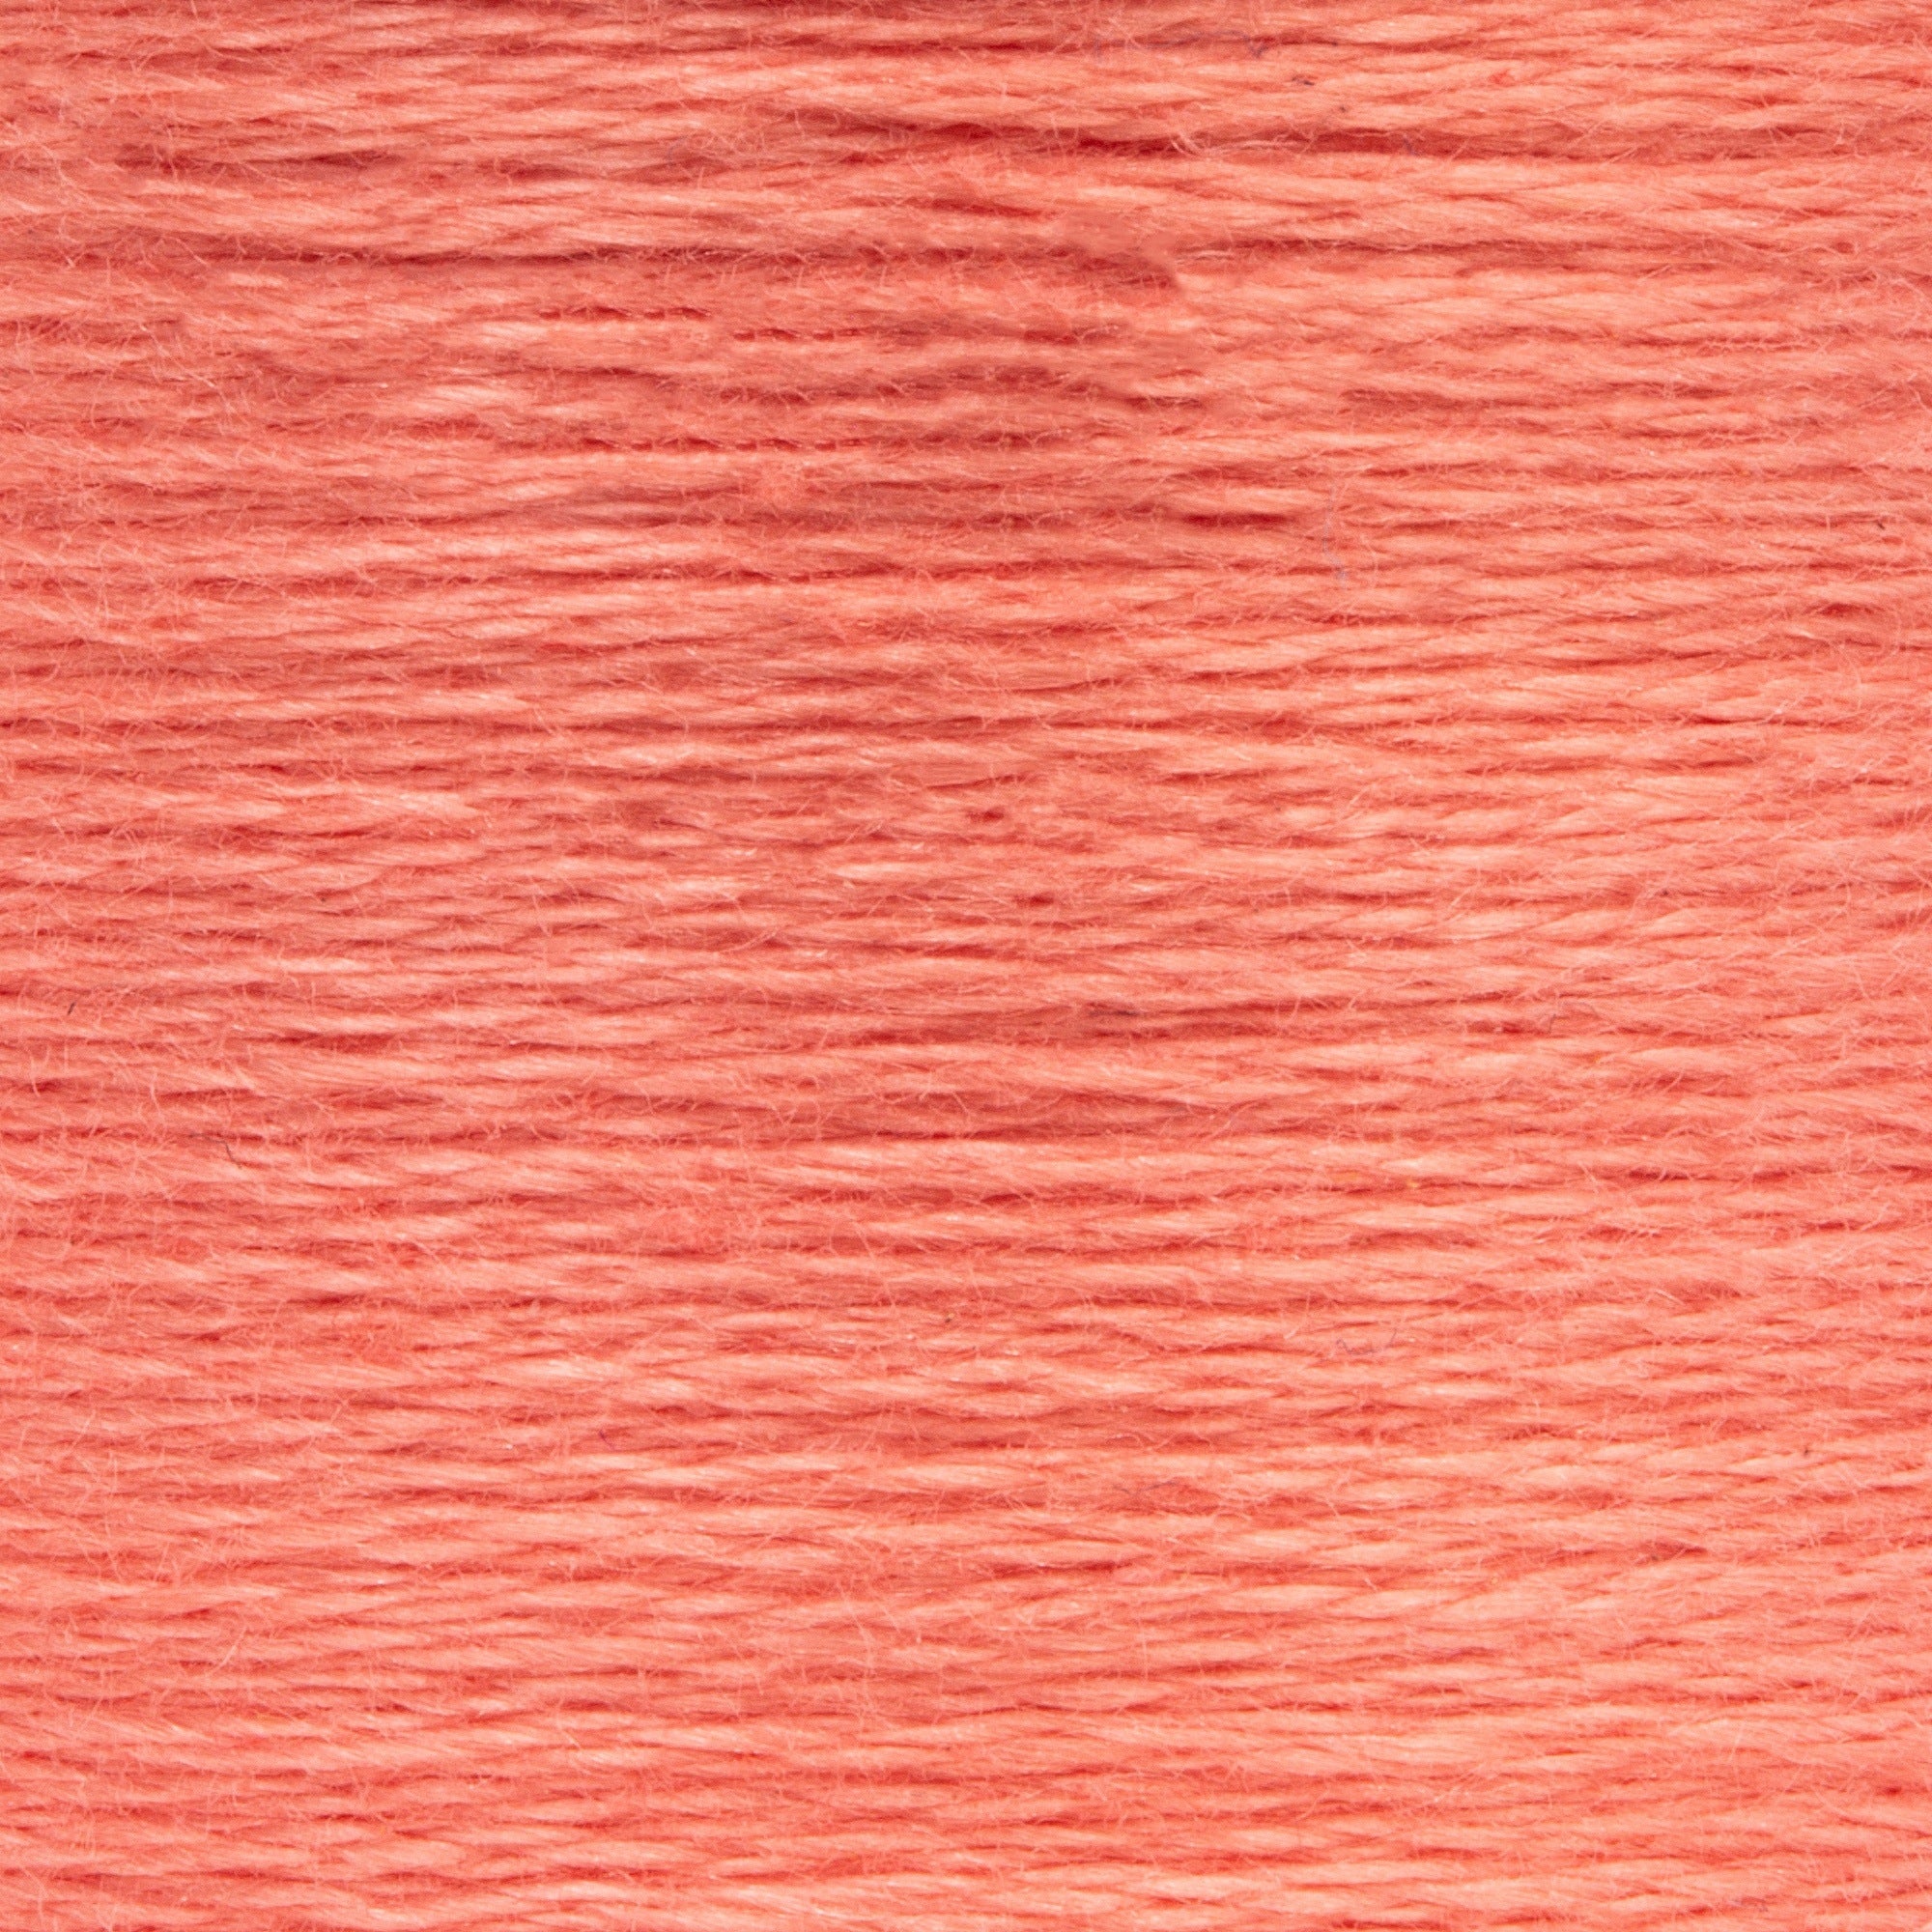 Anchor Embroidery Floss in Salmon Med Lt